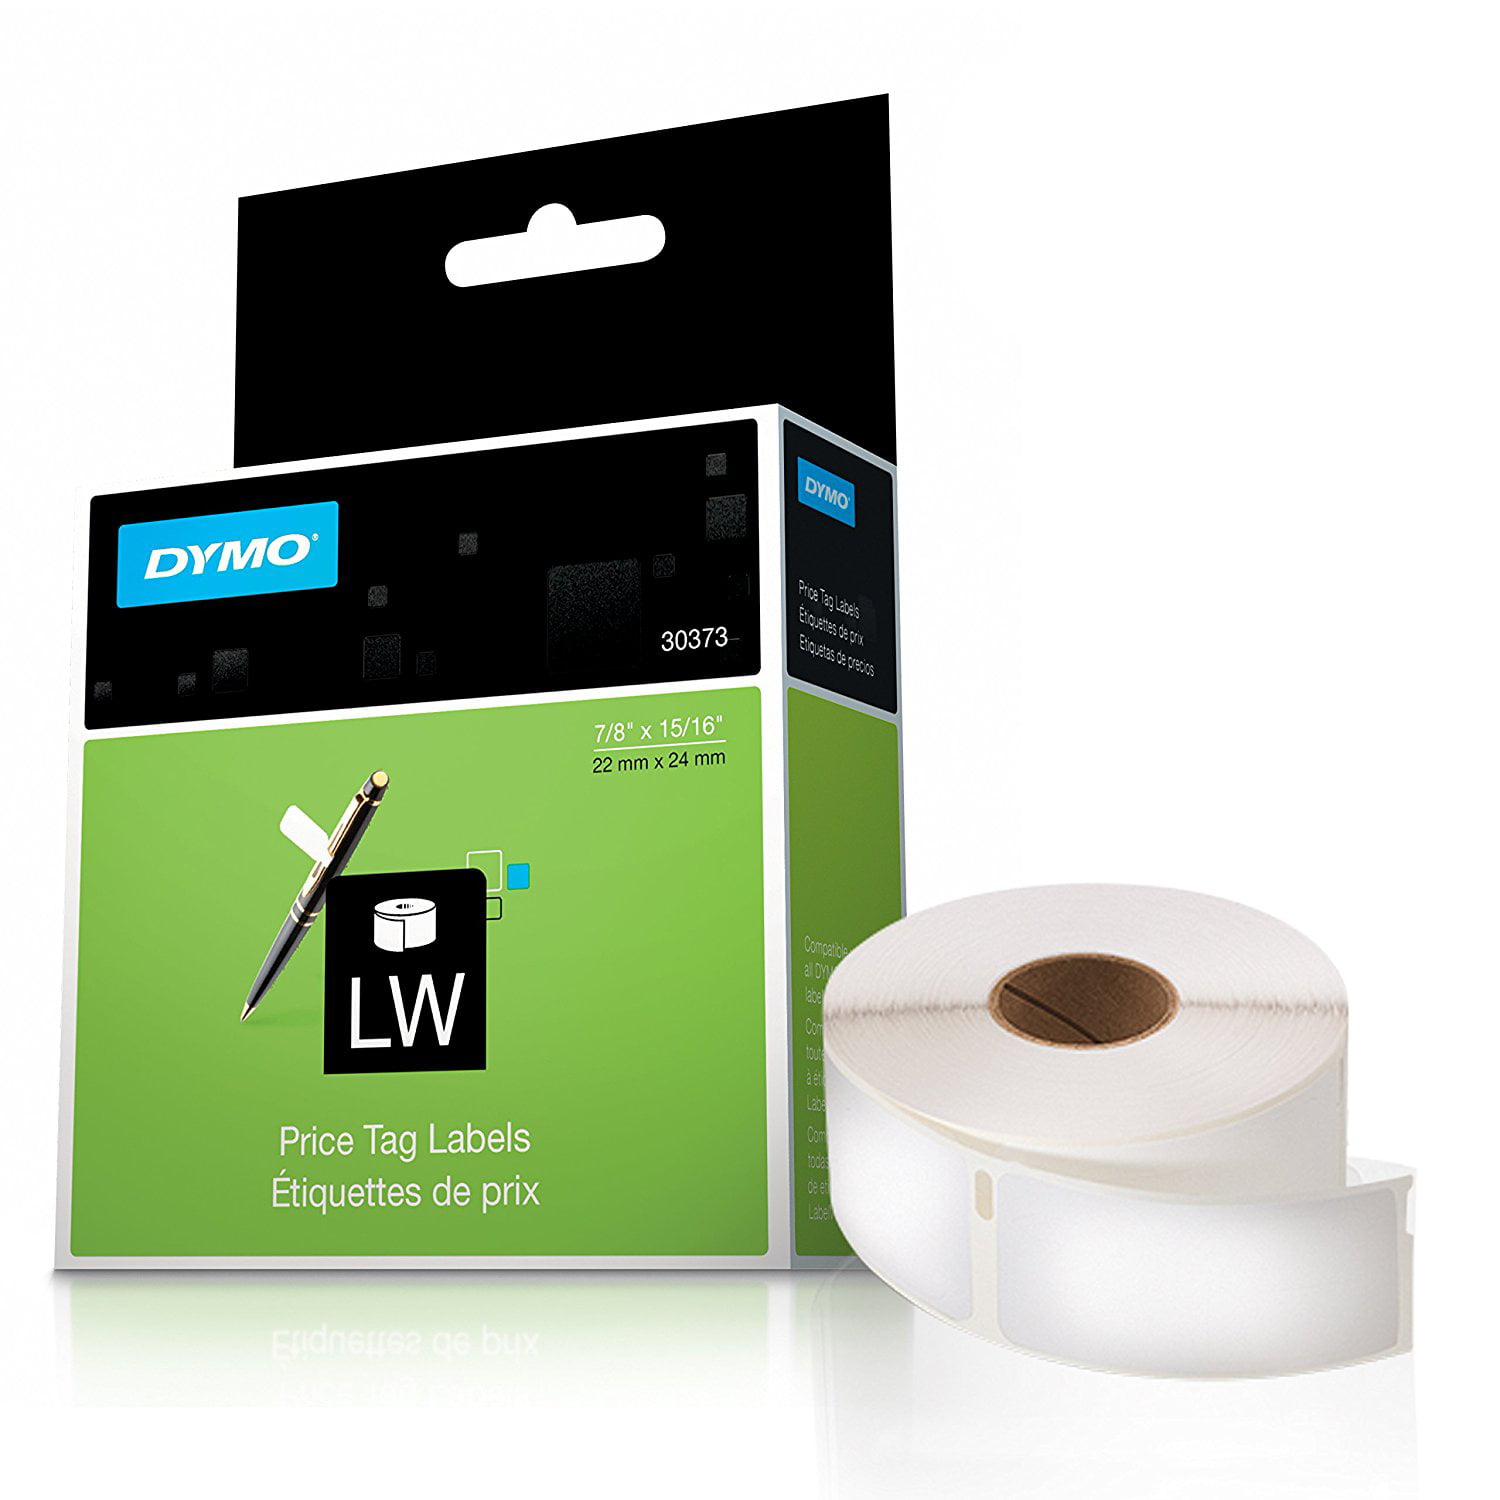 White New DYMO LW 1-Up File Folder Labels for LabelWriter Label Printers 30327 9/16 x 3-7/16 2 Rolls of 130 